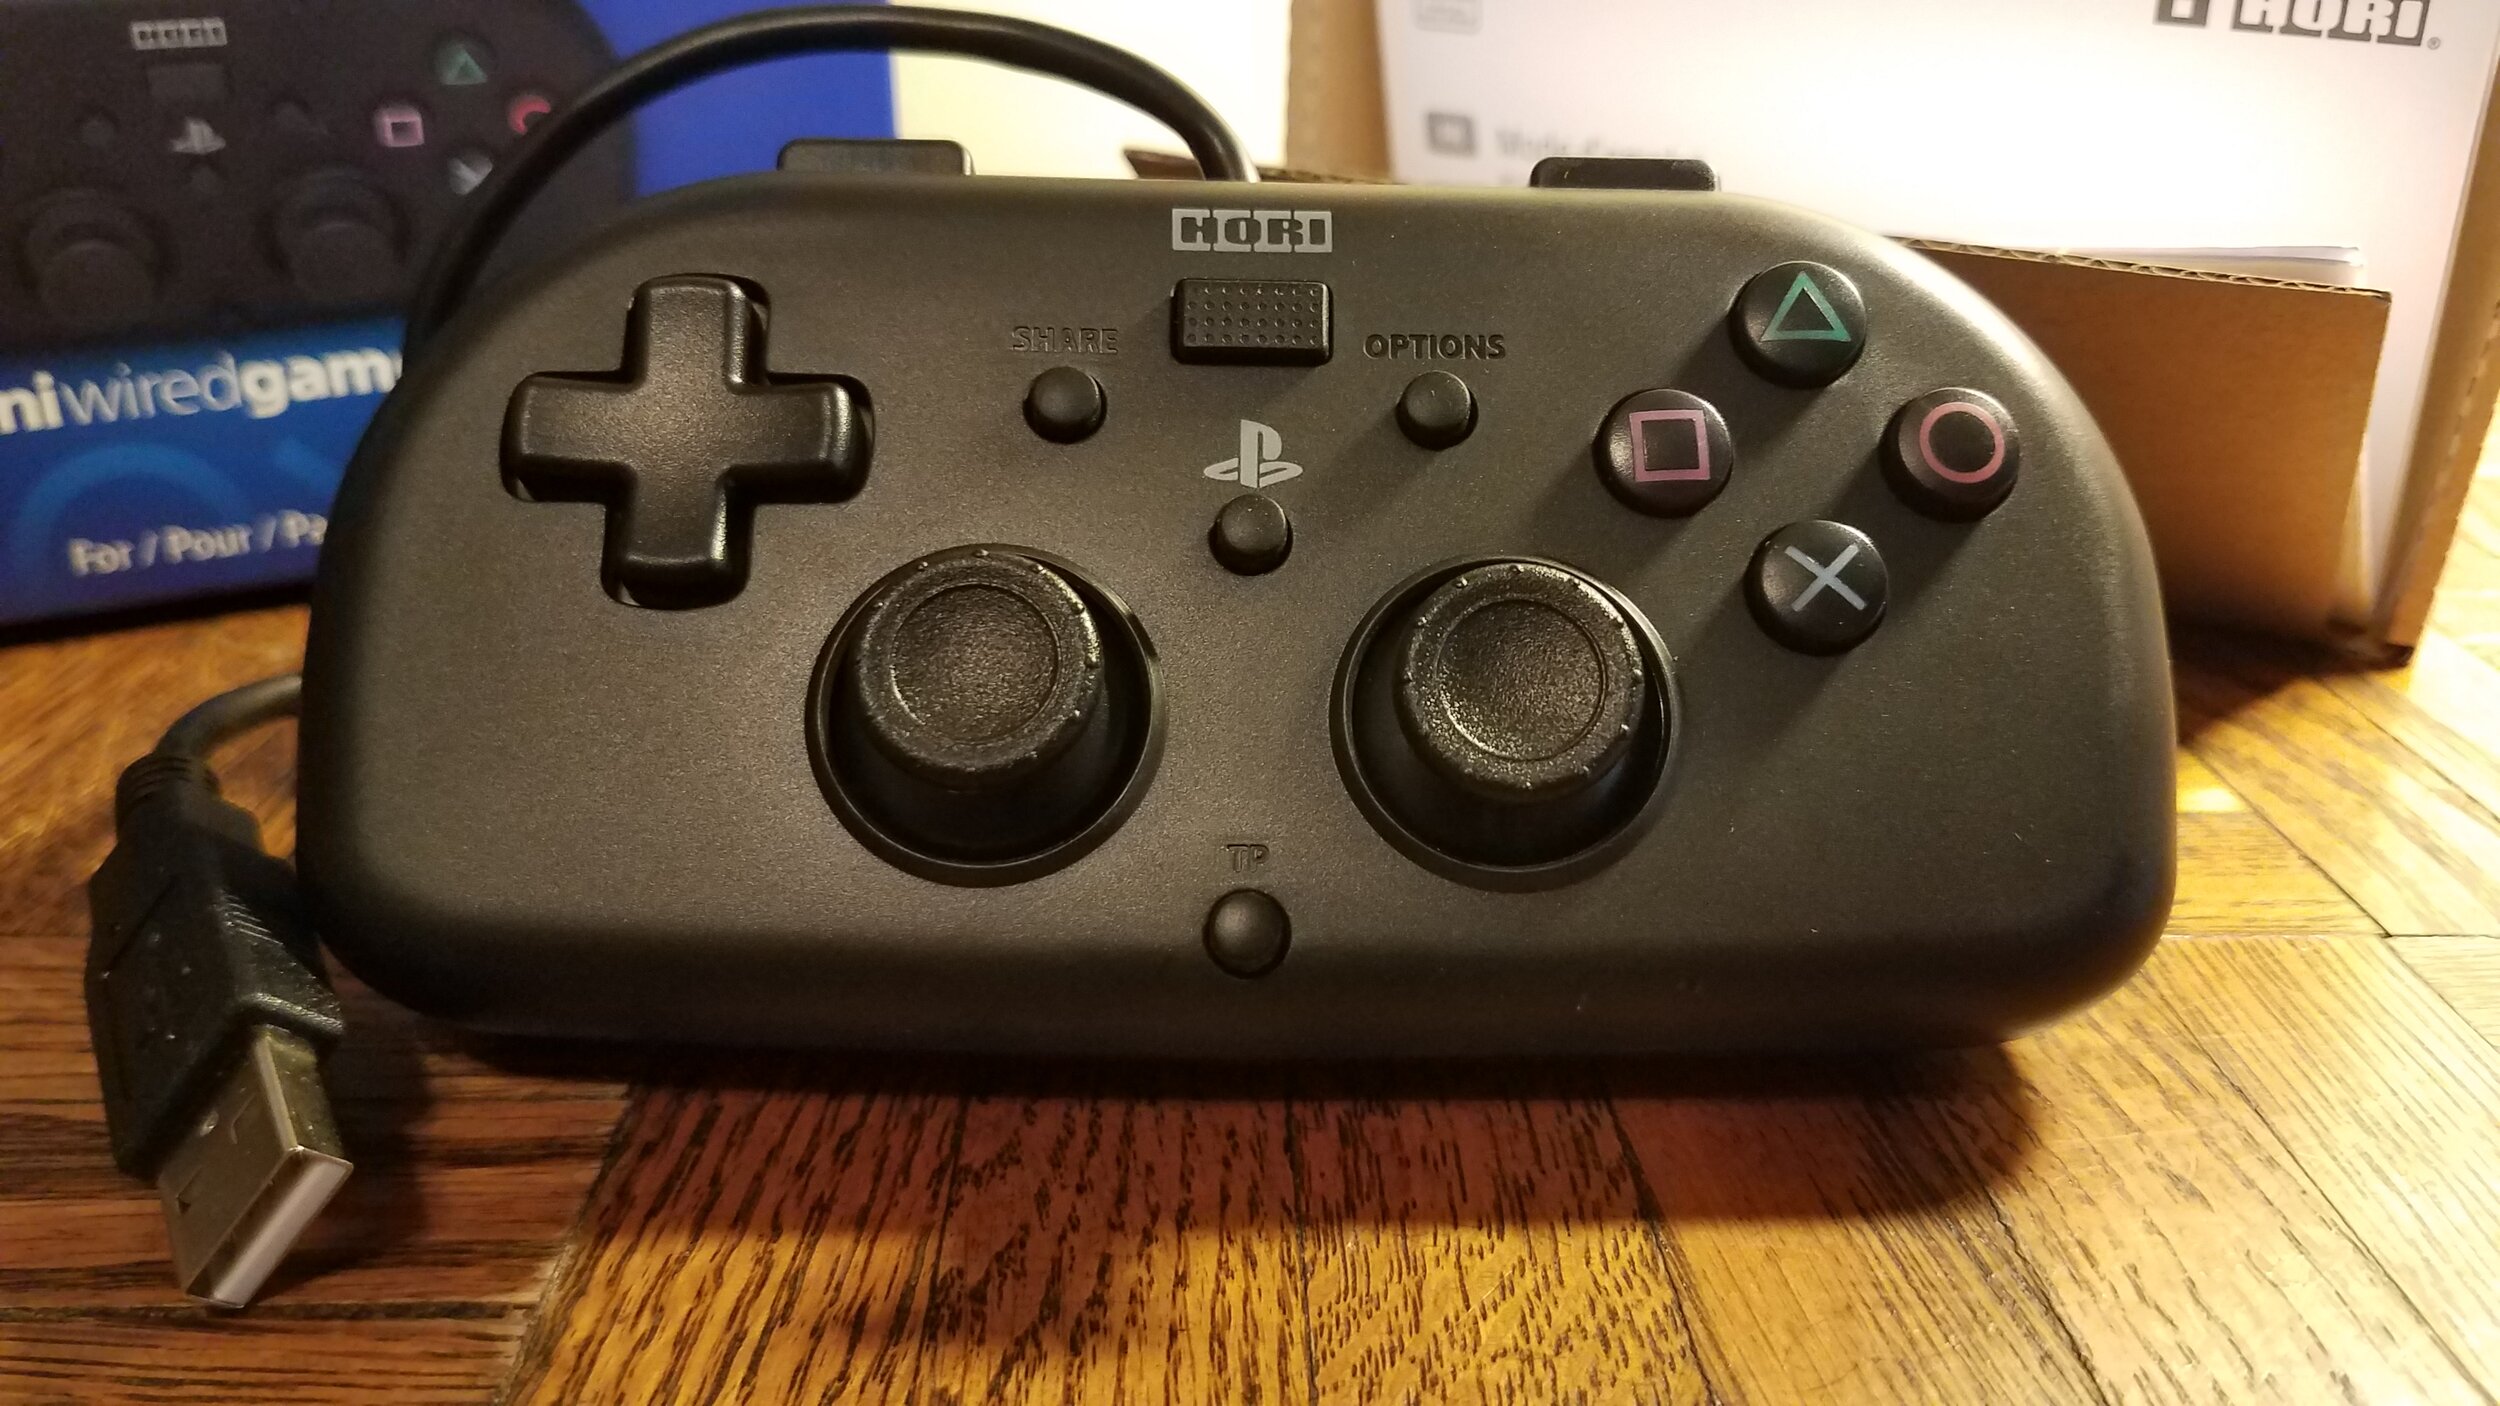 Hori Mini Wired Playstation 4 Controller Review — Game Controller Reviews